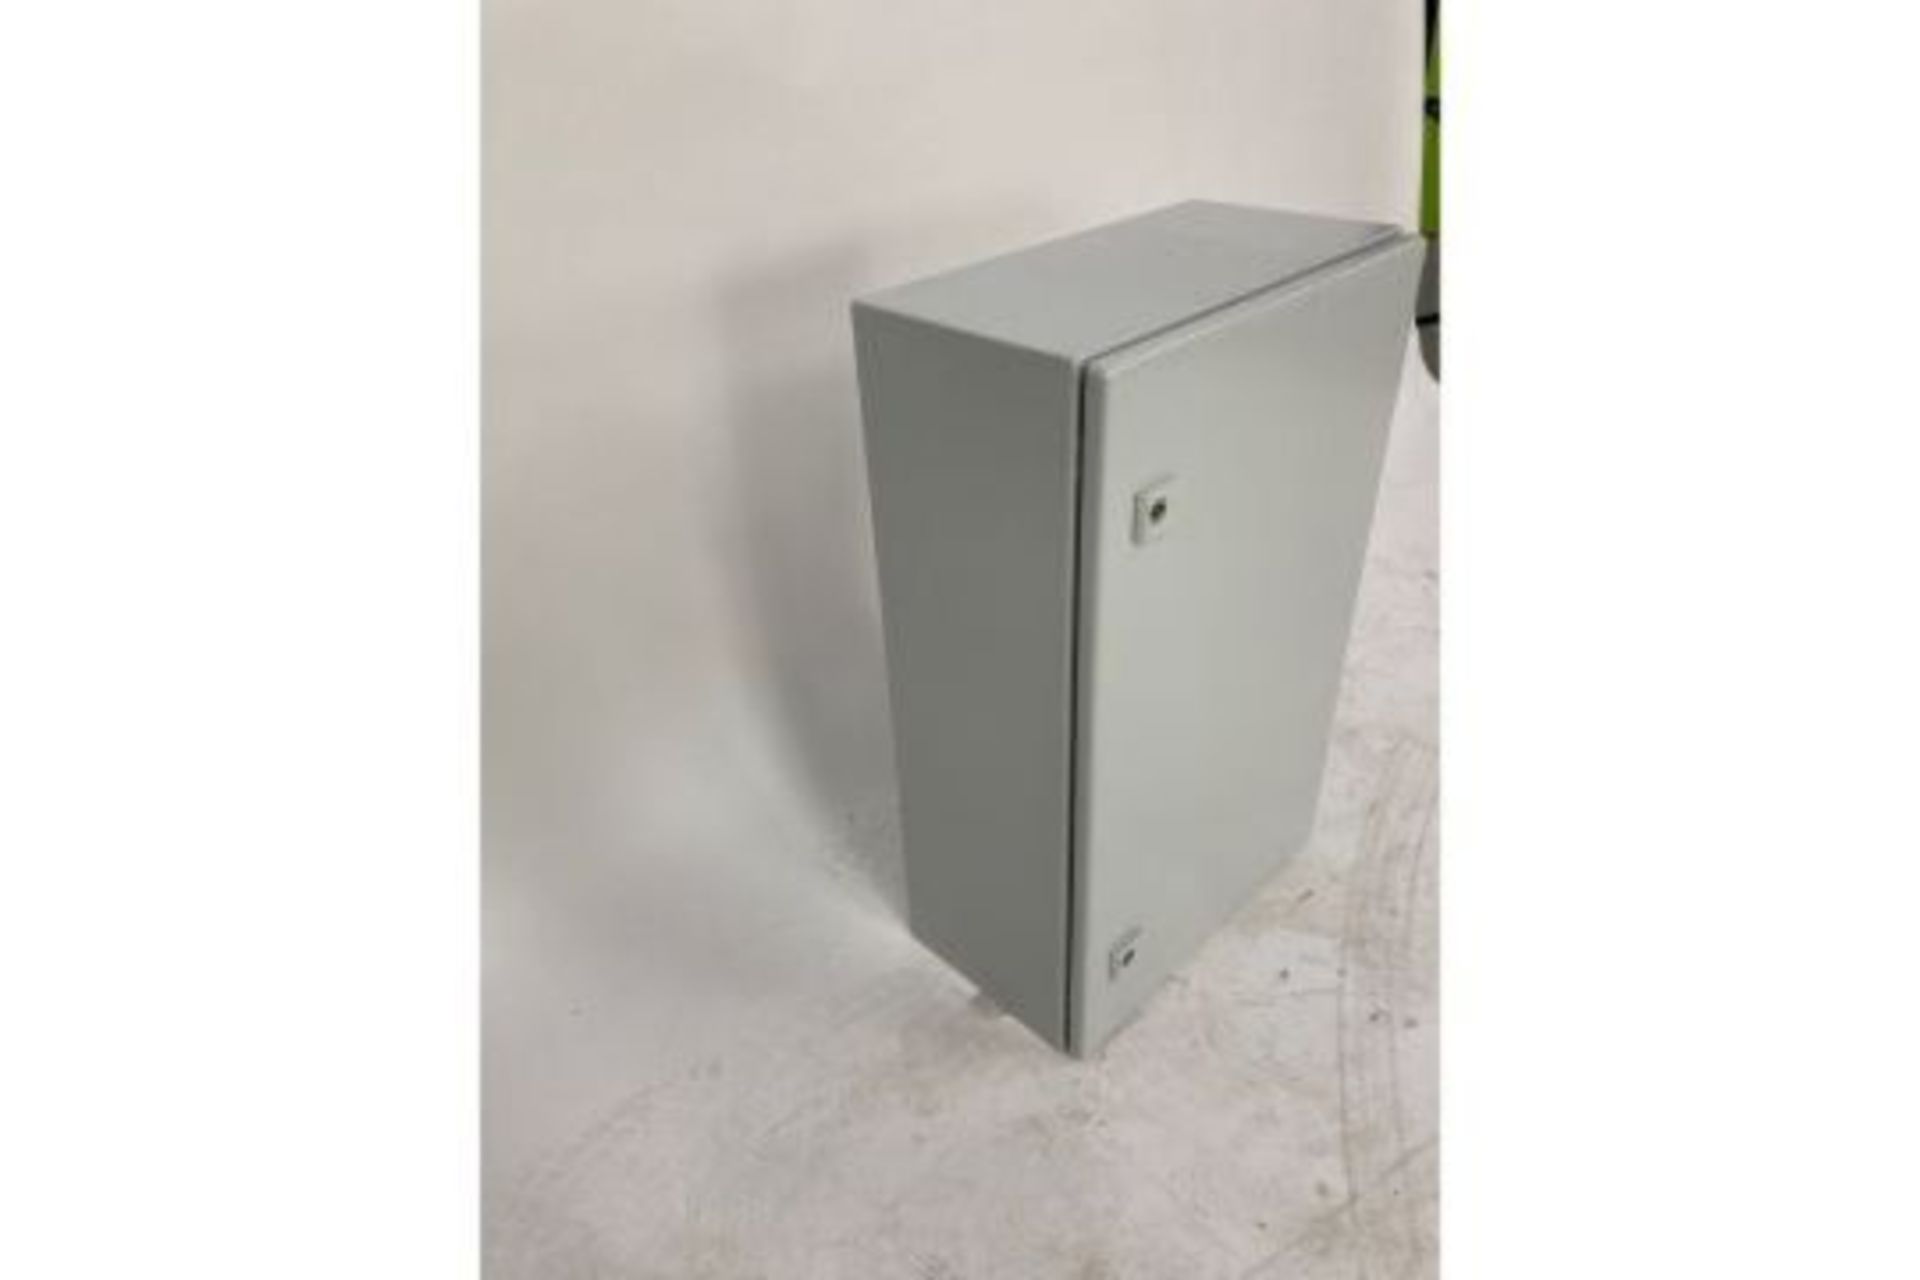 Rittal Compact cabinet - Image 2 of 3